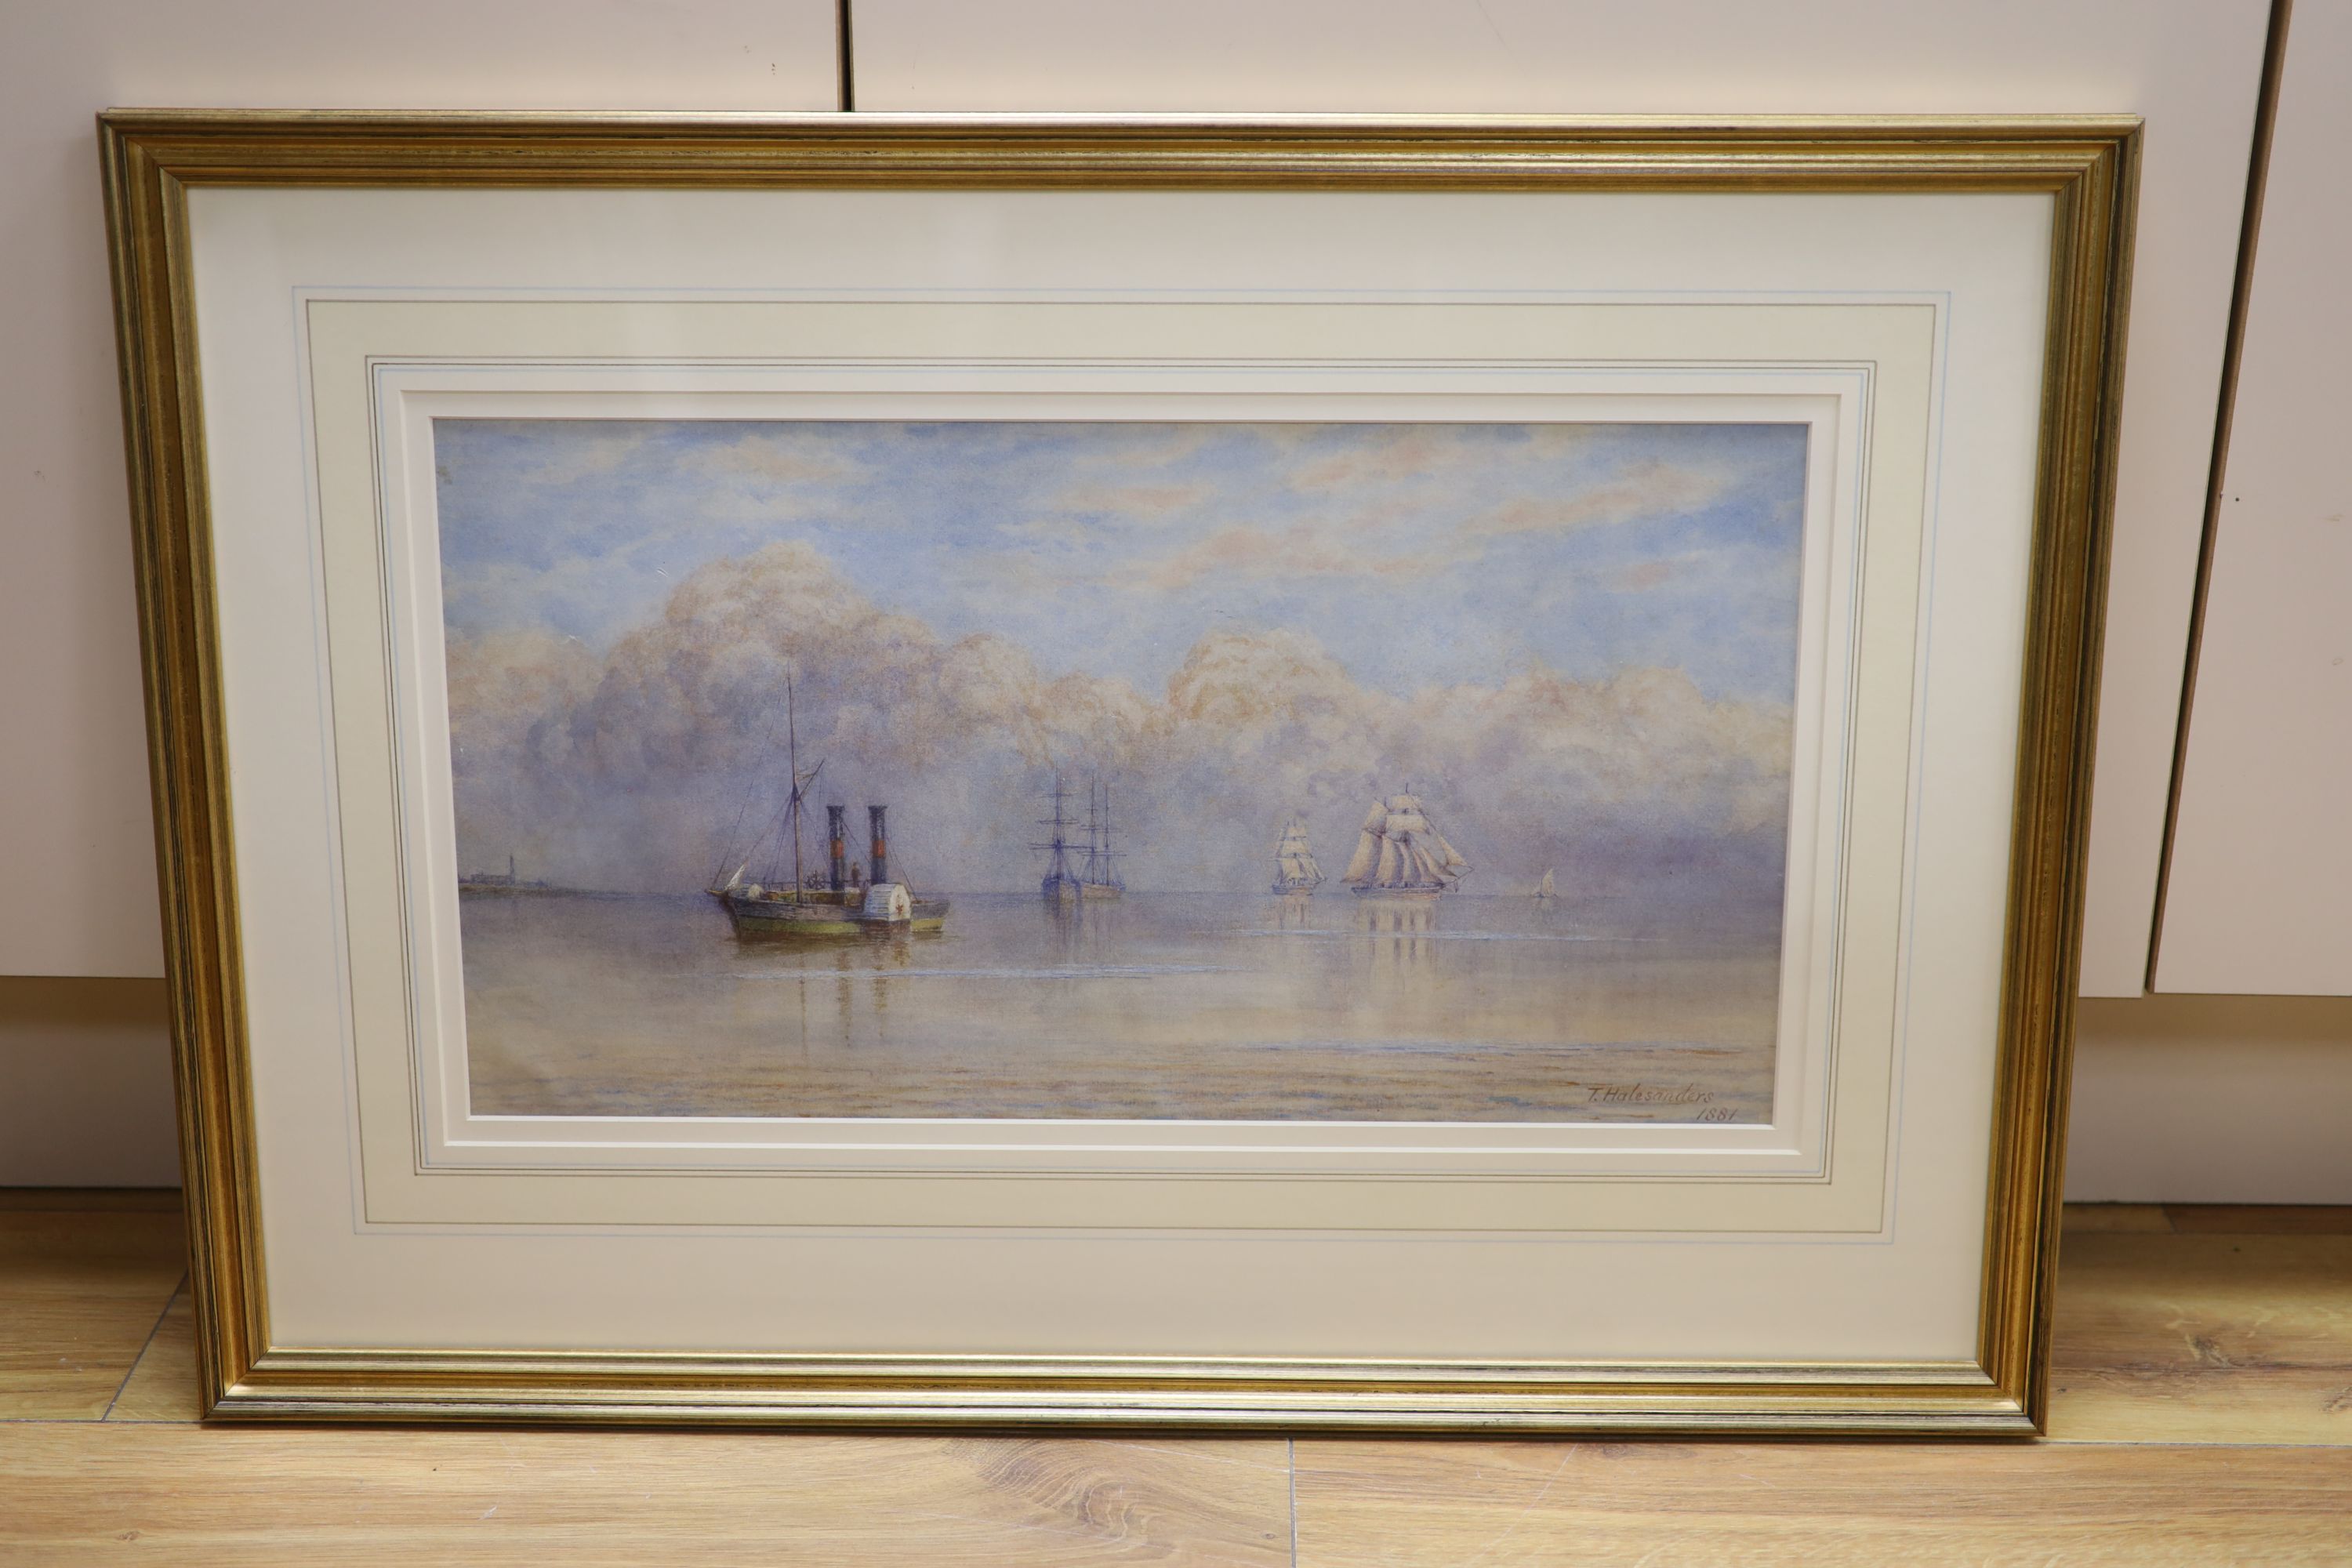 Thomas Hale Sanders (fl.1880-1906), watercolour, Paddlesteamers along the coast, signed and dated 1881, 27 x 50cm